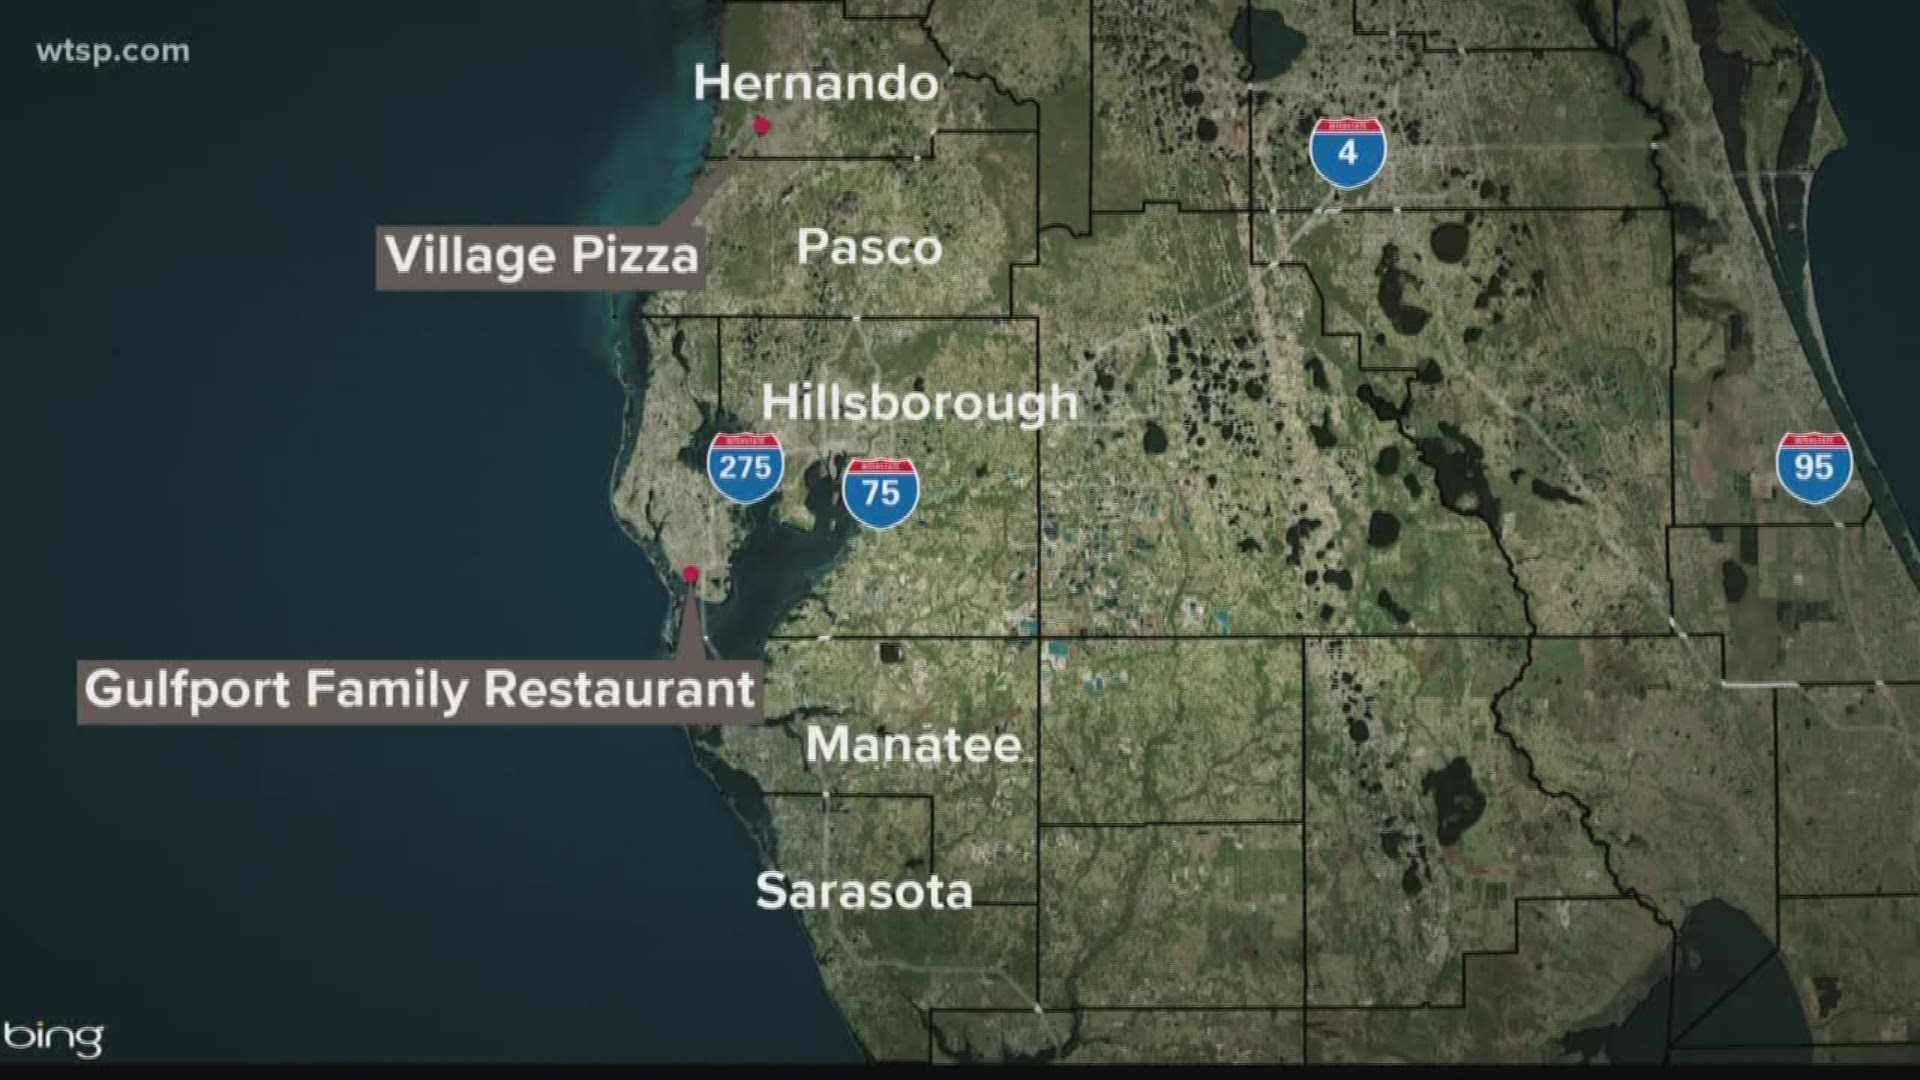 A restaurant worker who tested positive for hepatitis A may have exposed customers earlier this month, according to the Florida Department of Health in Hernando County.

The Department of Health said a Village Pizza Restaurant employee may have exposed customers between May 29 and June 5.